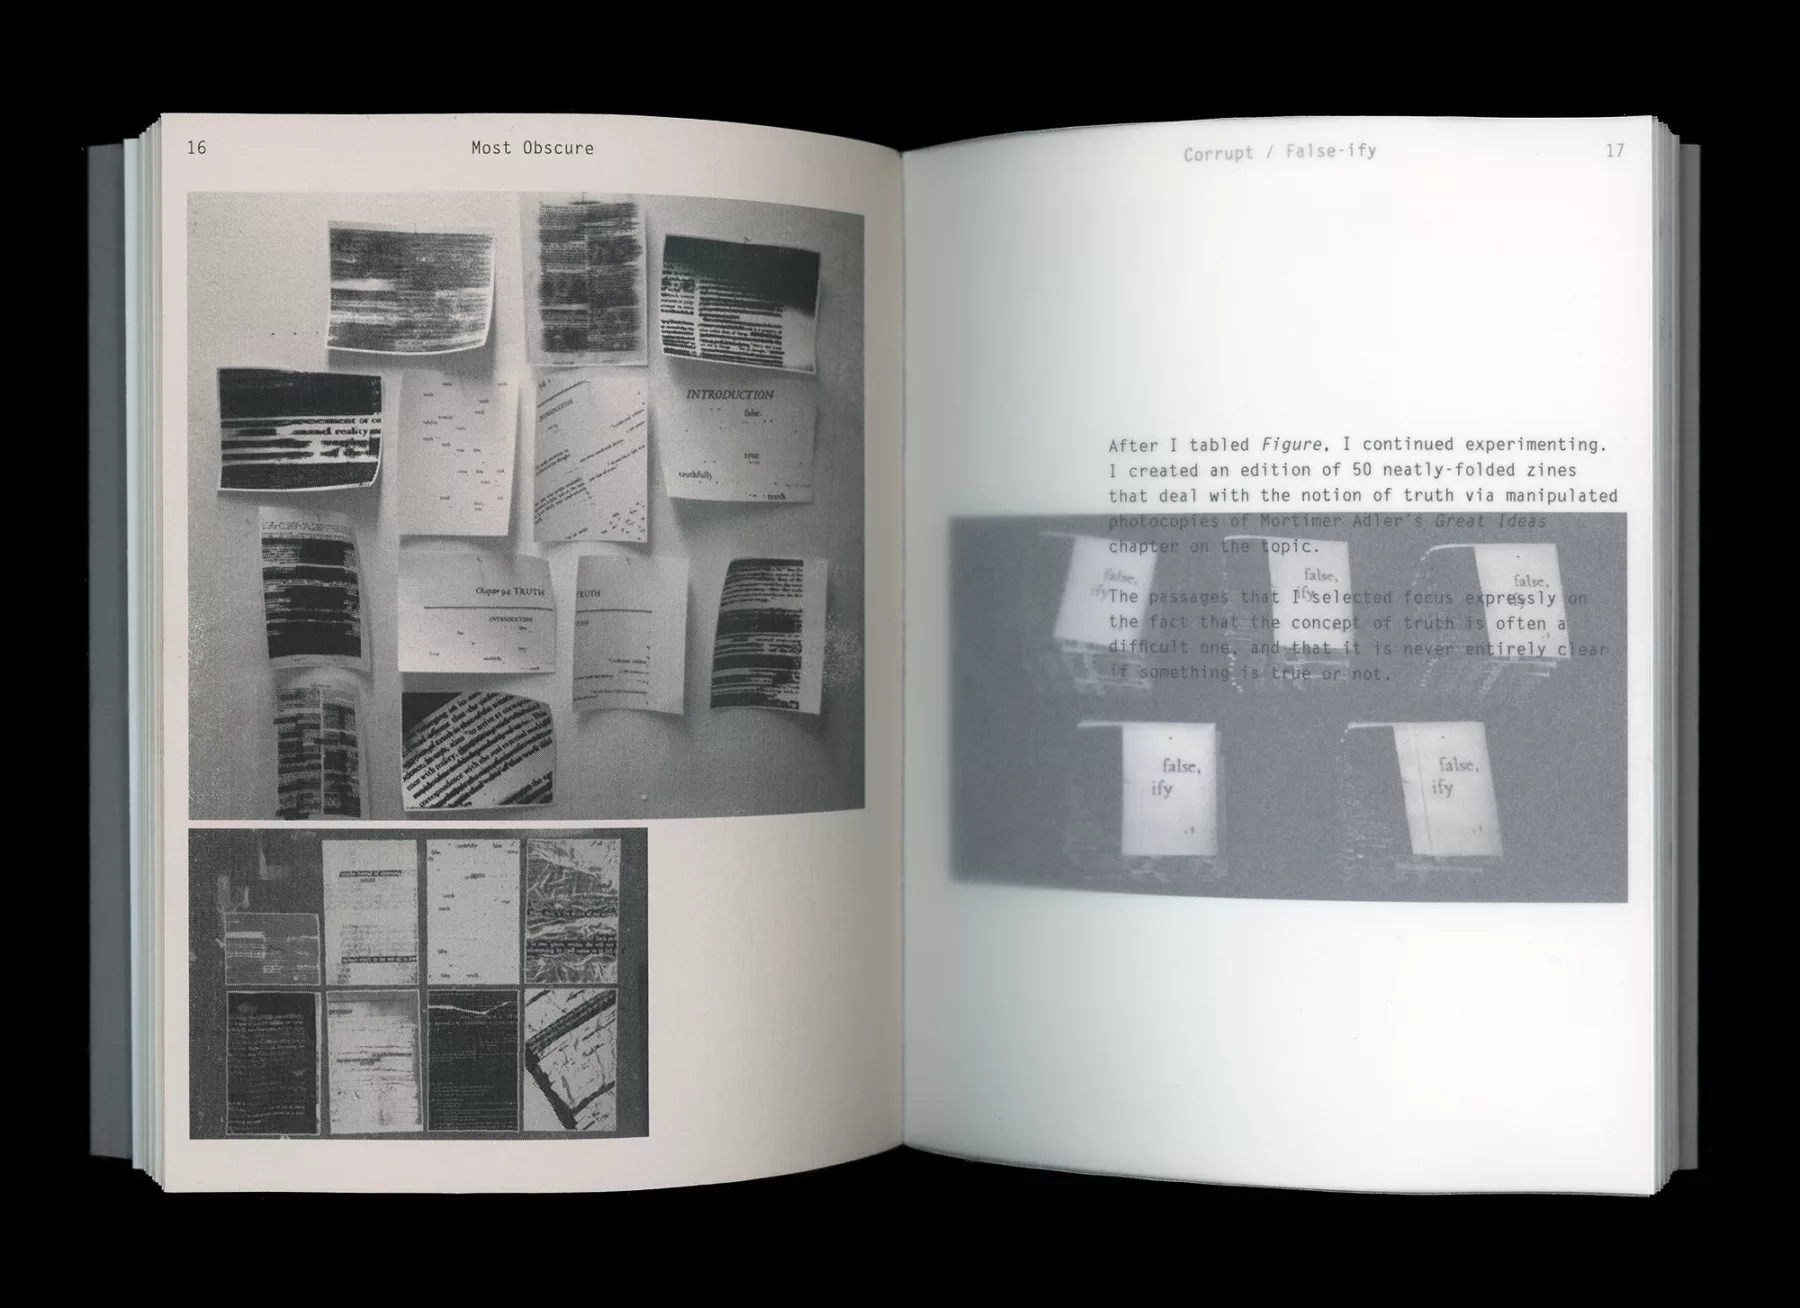 Spread of 'Most Obscure' book showing modified and obscured scanned book pages, and zines that were made from these images.